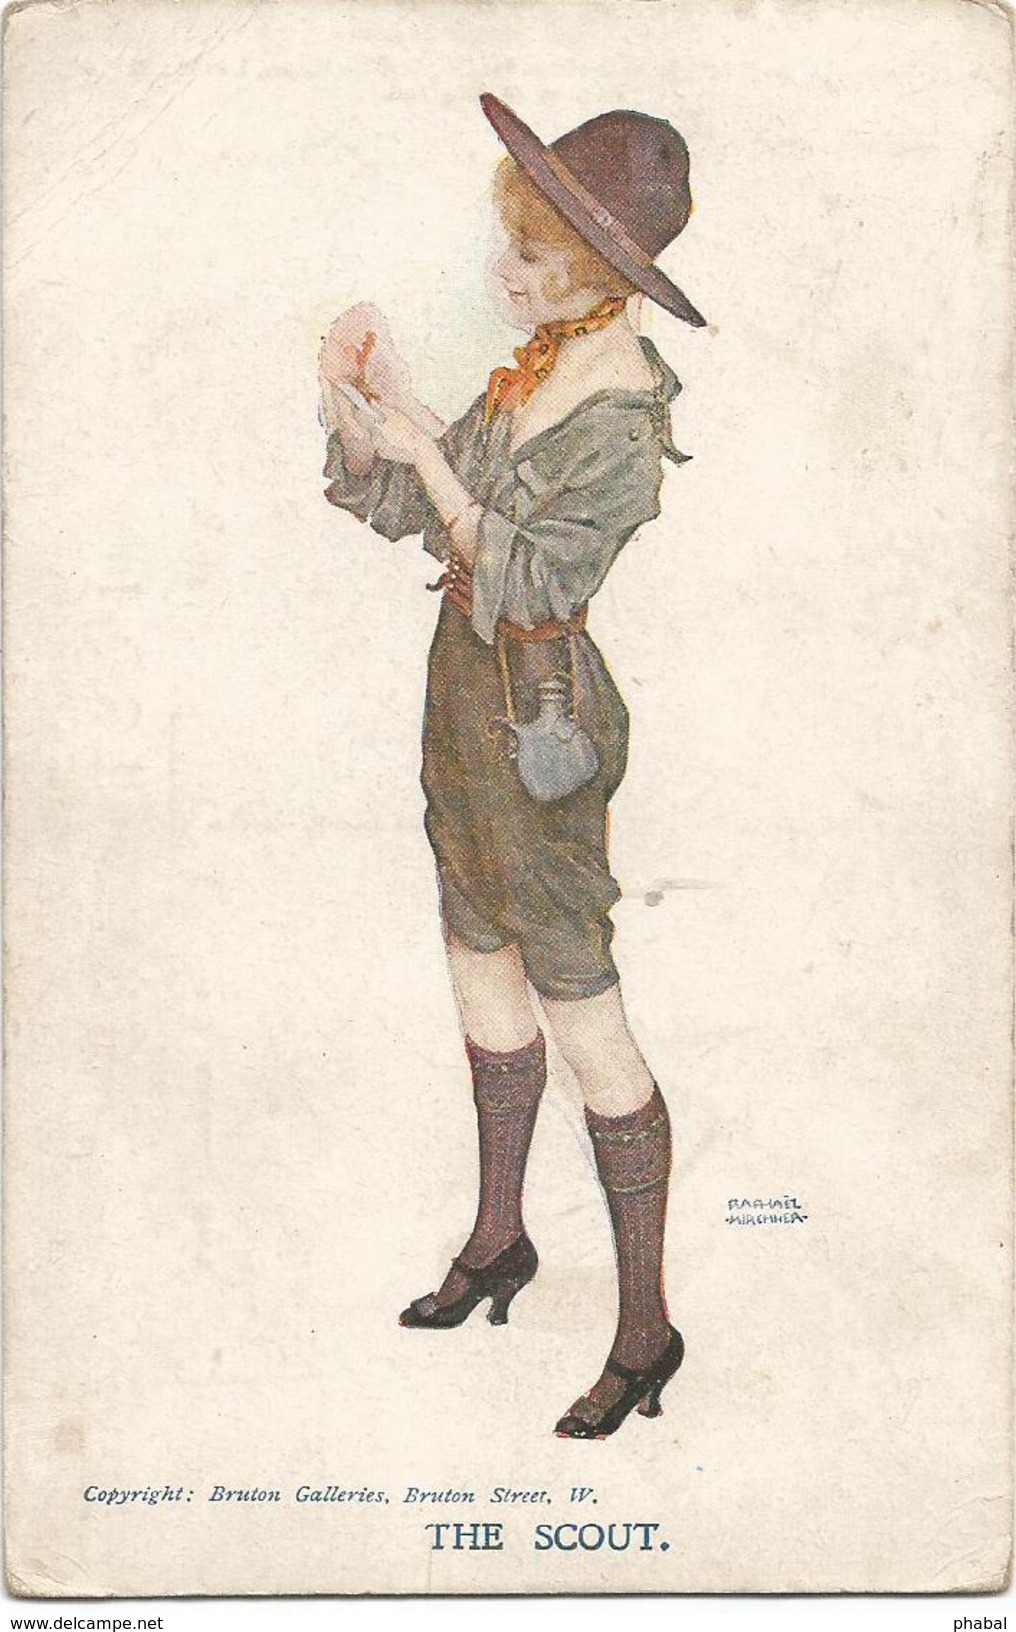 Raphael Kirchner, Scouts, The Scout, Old Postcard - Kirchner, Raphael